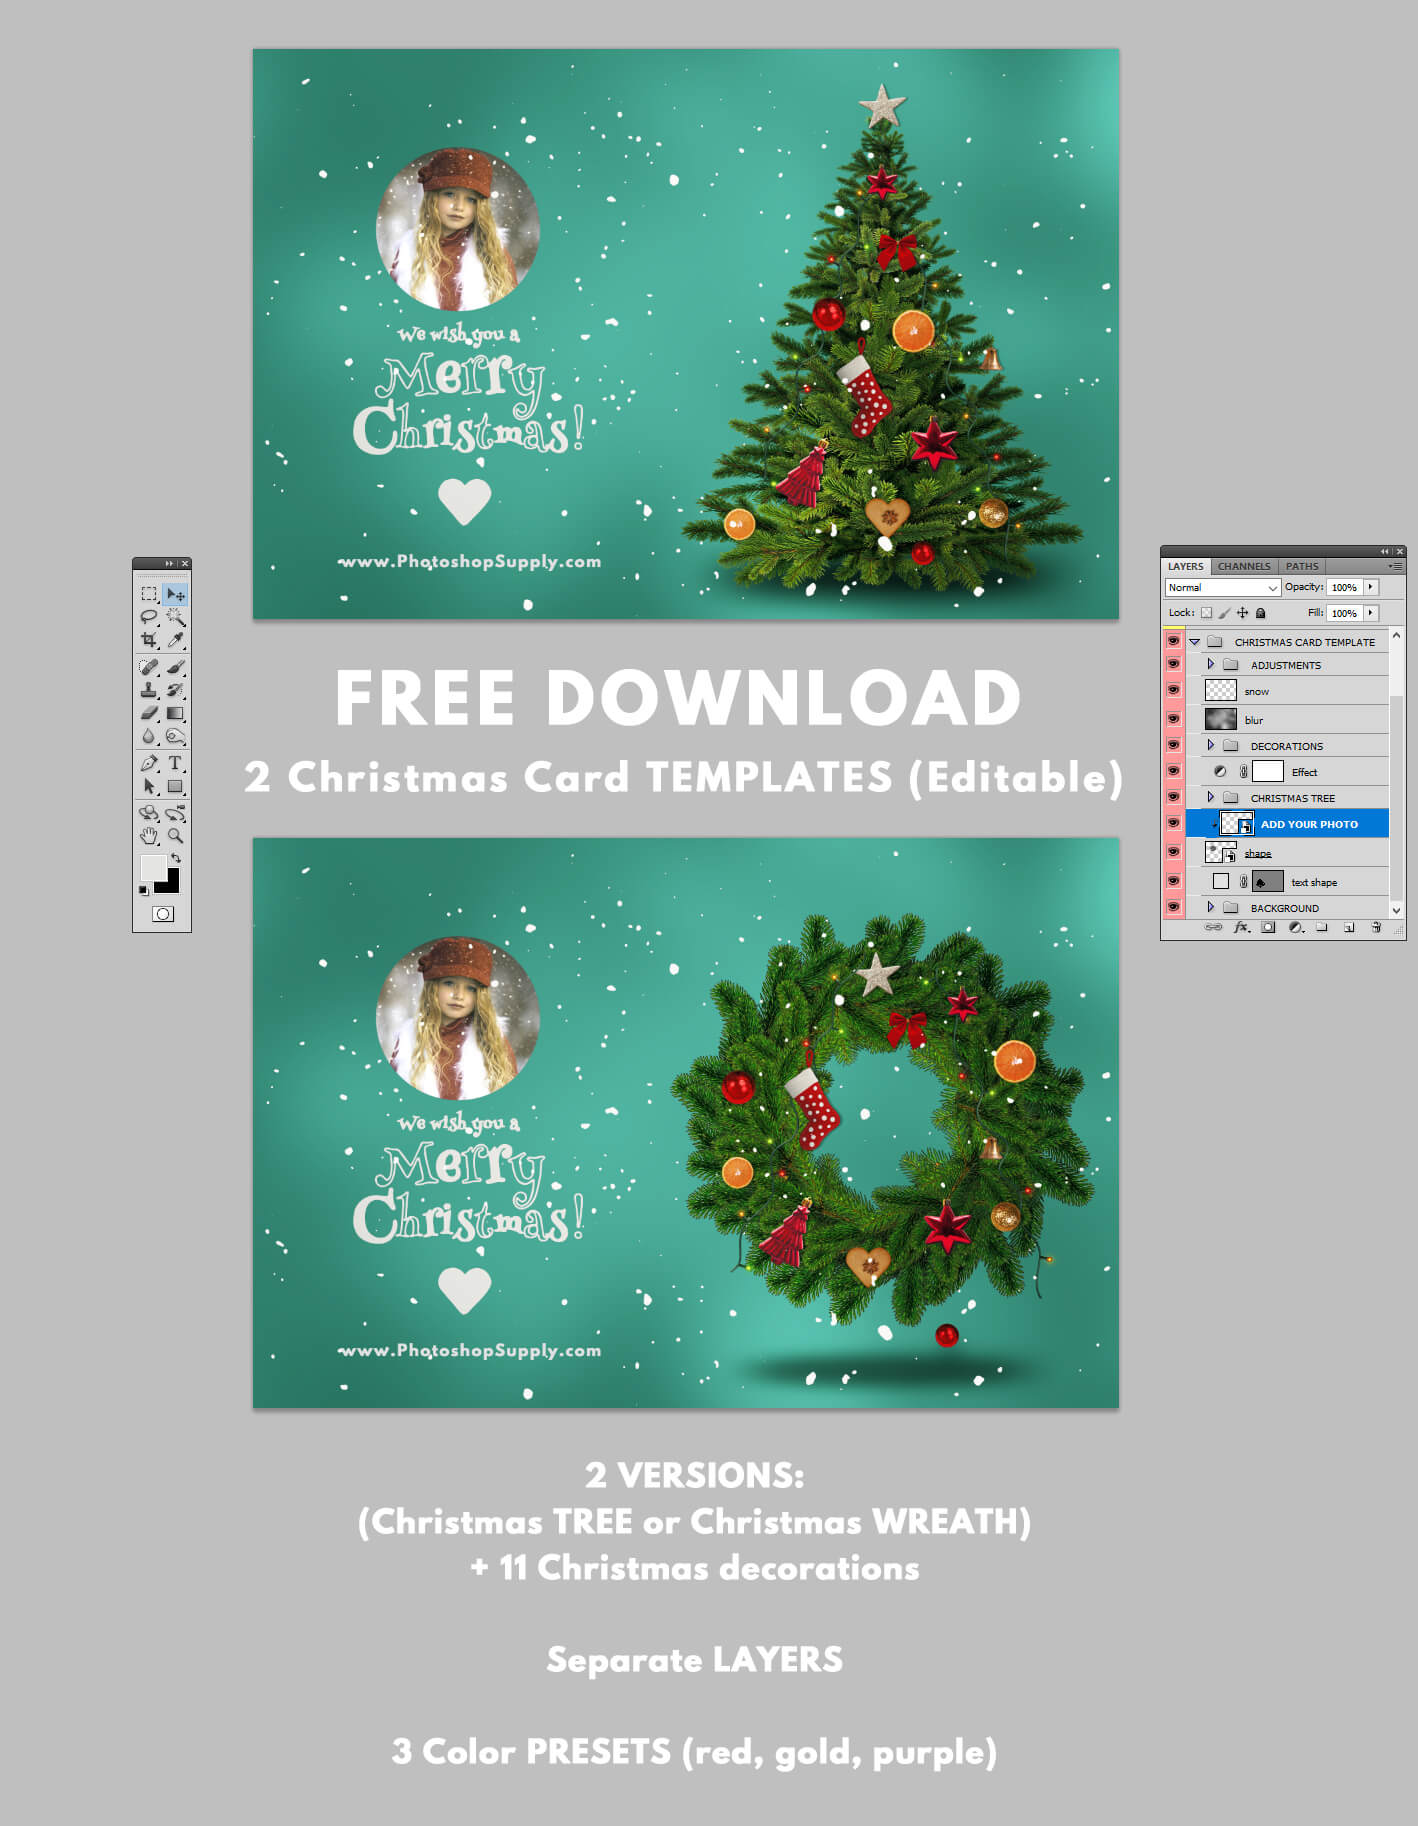 009 Christmas Card Template Photoshop Intended For Christmas Photo Card Templates Photoshop